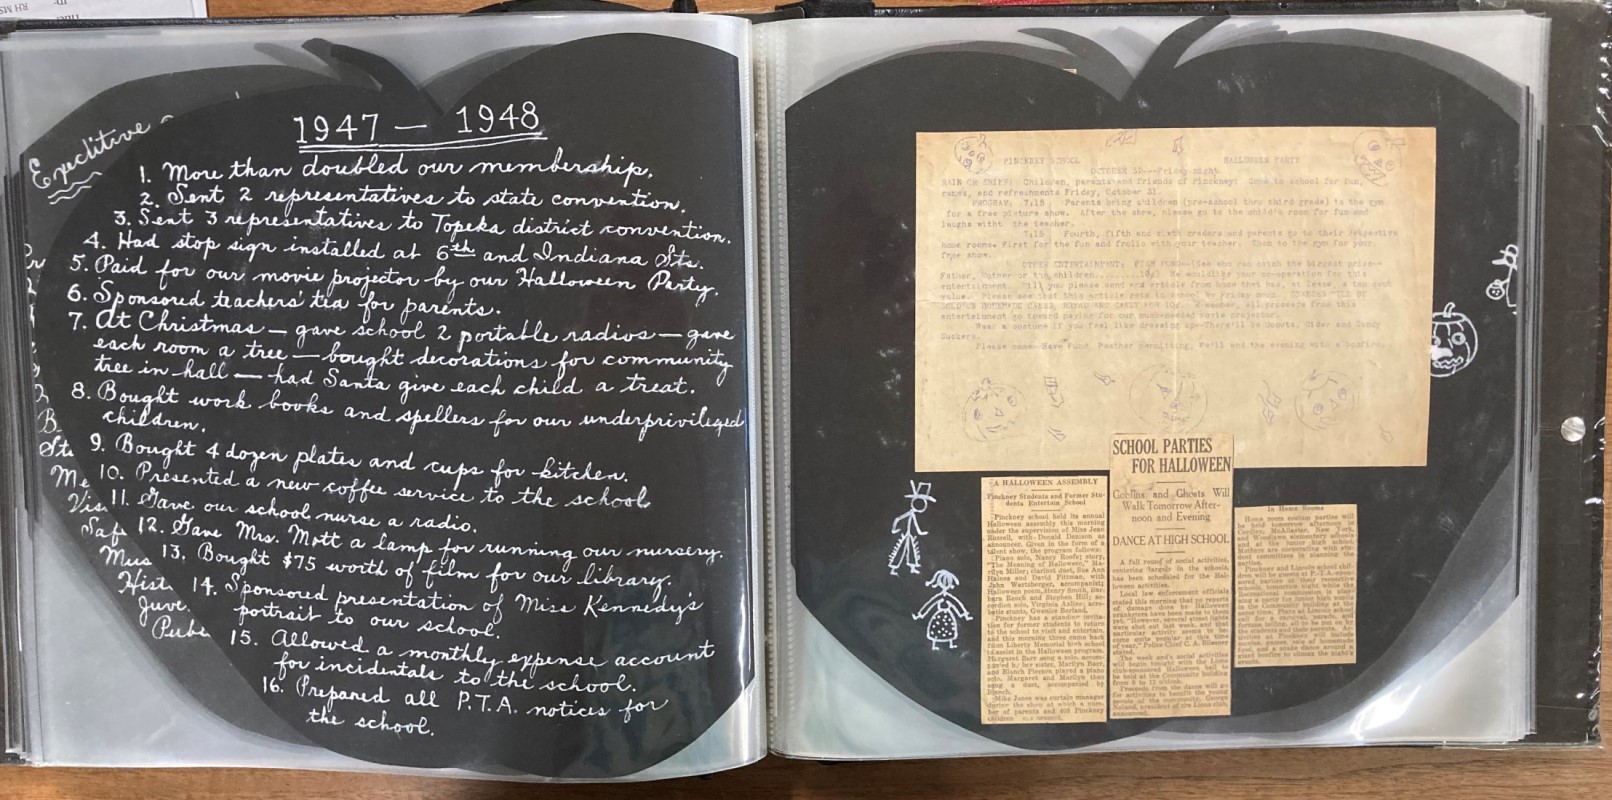 Black pages in the shape of an apple. On the left is white handwritten text detailing highlights from the school year. On the right are clippings.